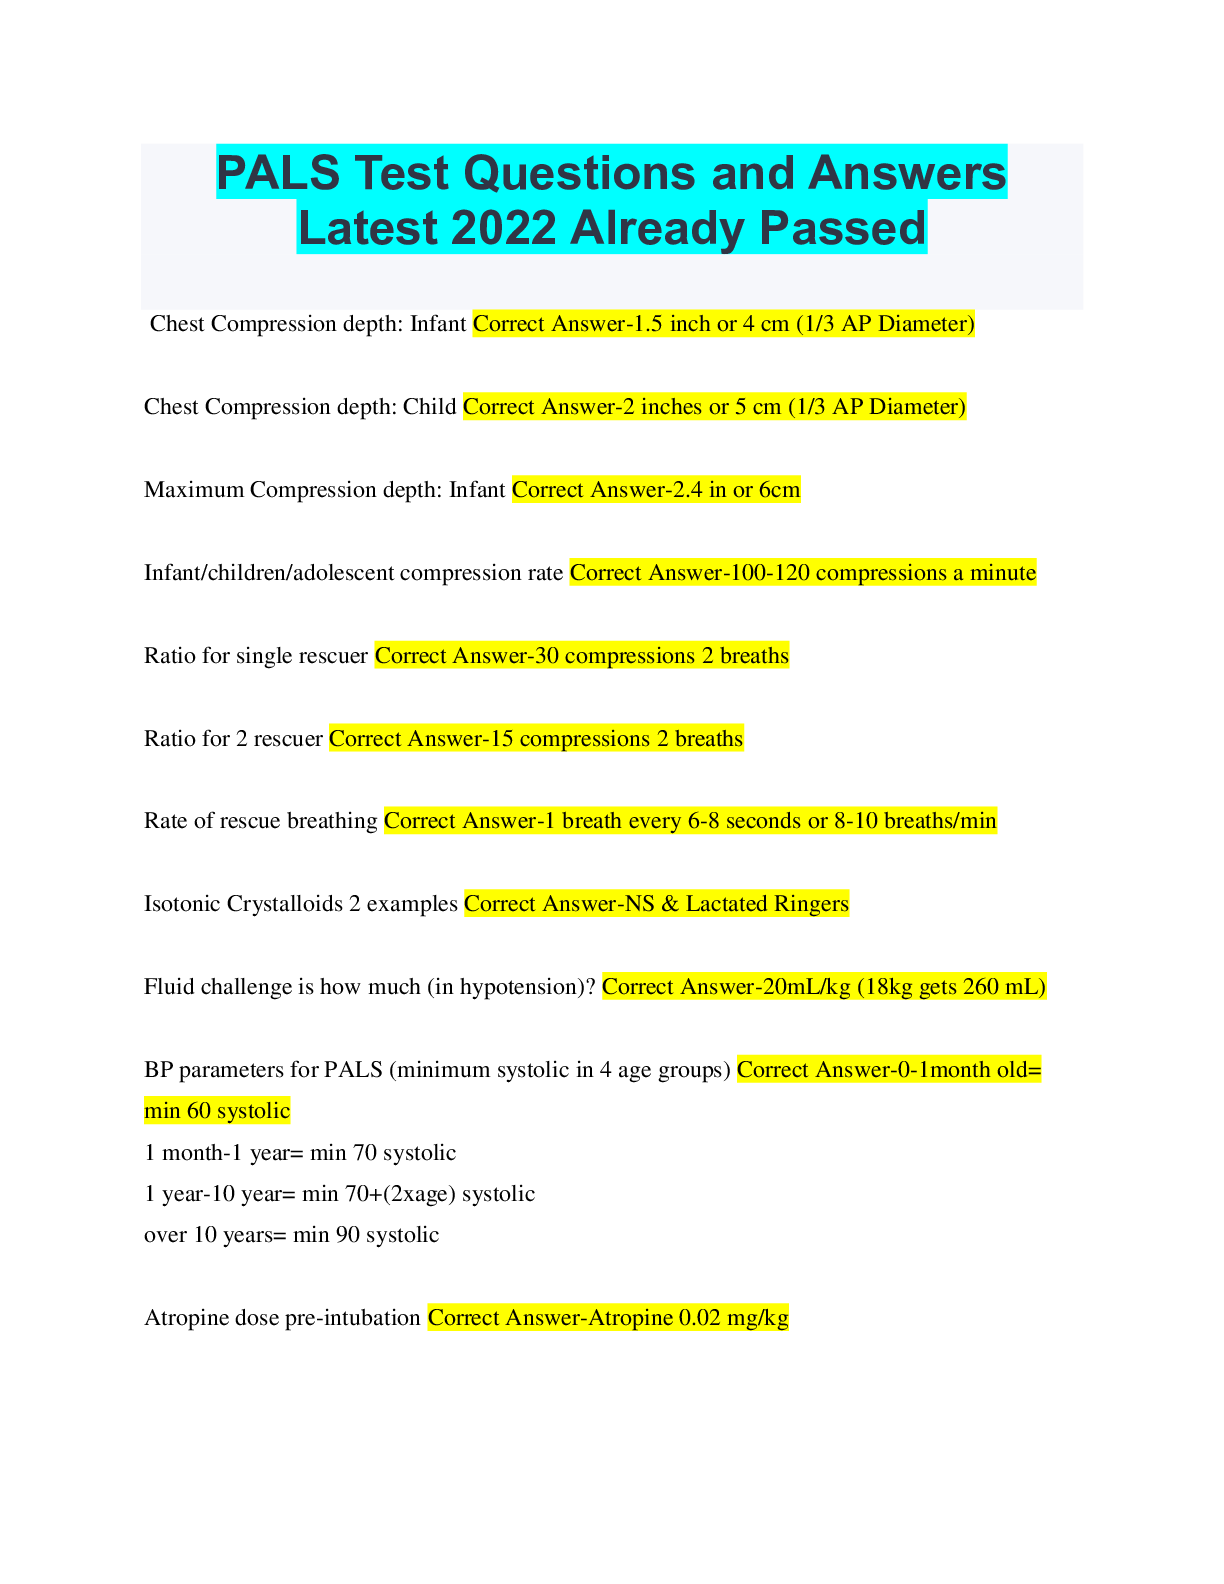 PALS Test Questions and Answers Latest 2022 Already Passed Browsegrades